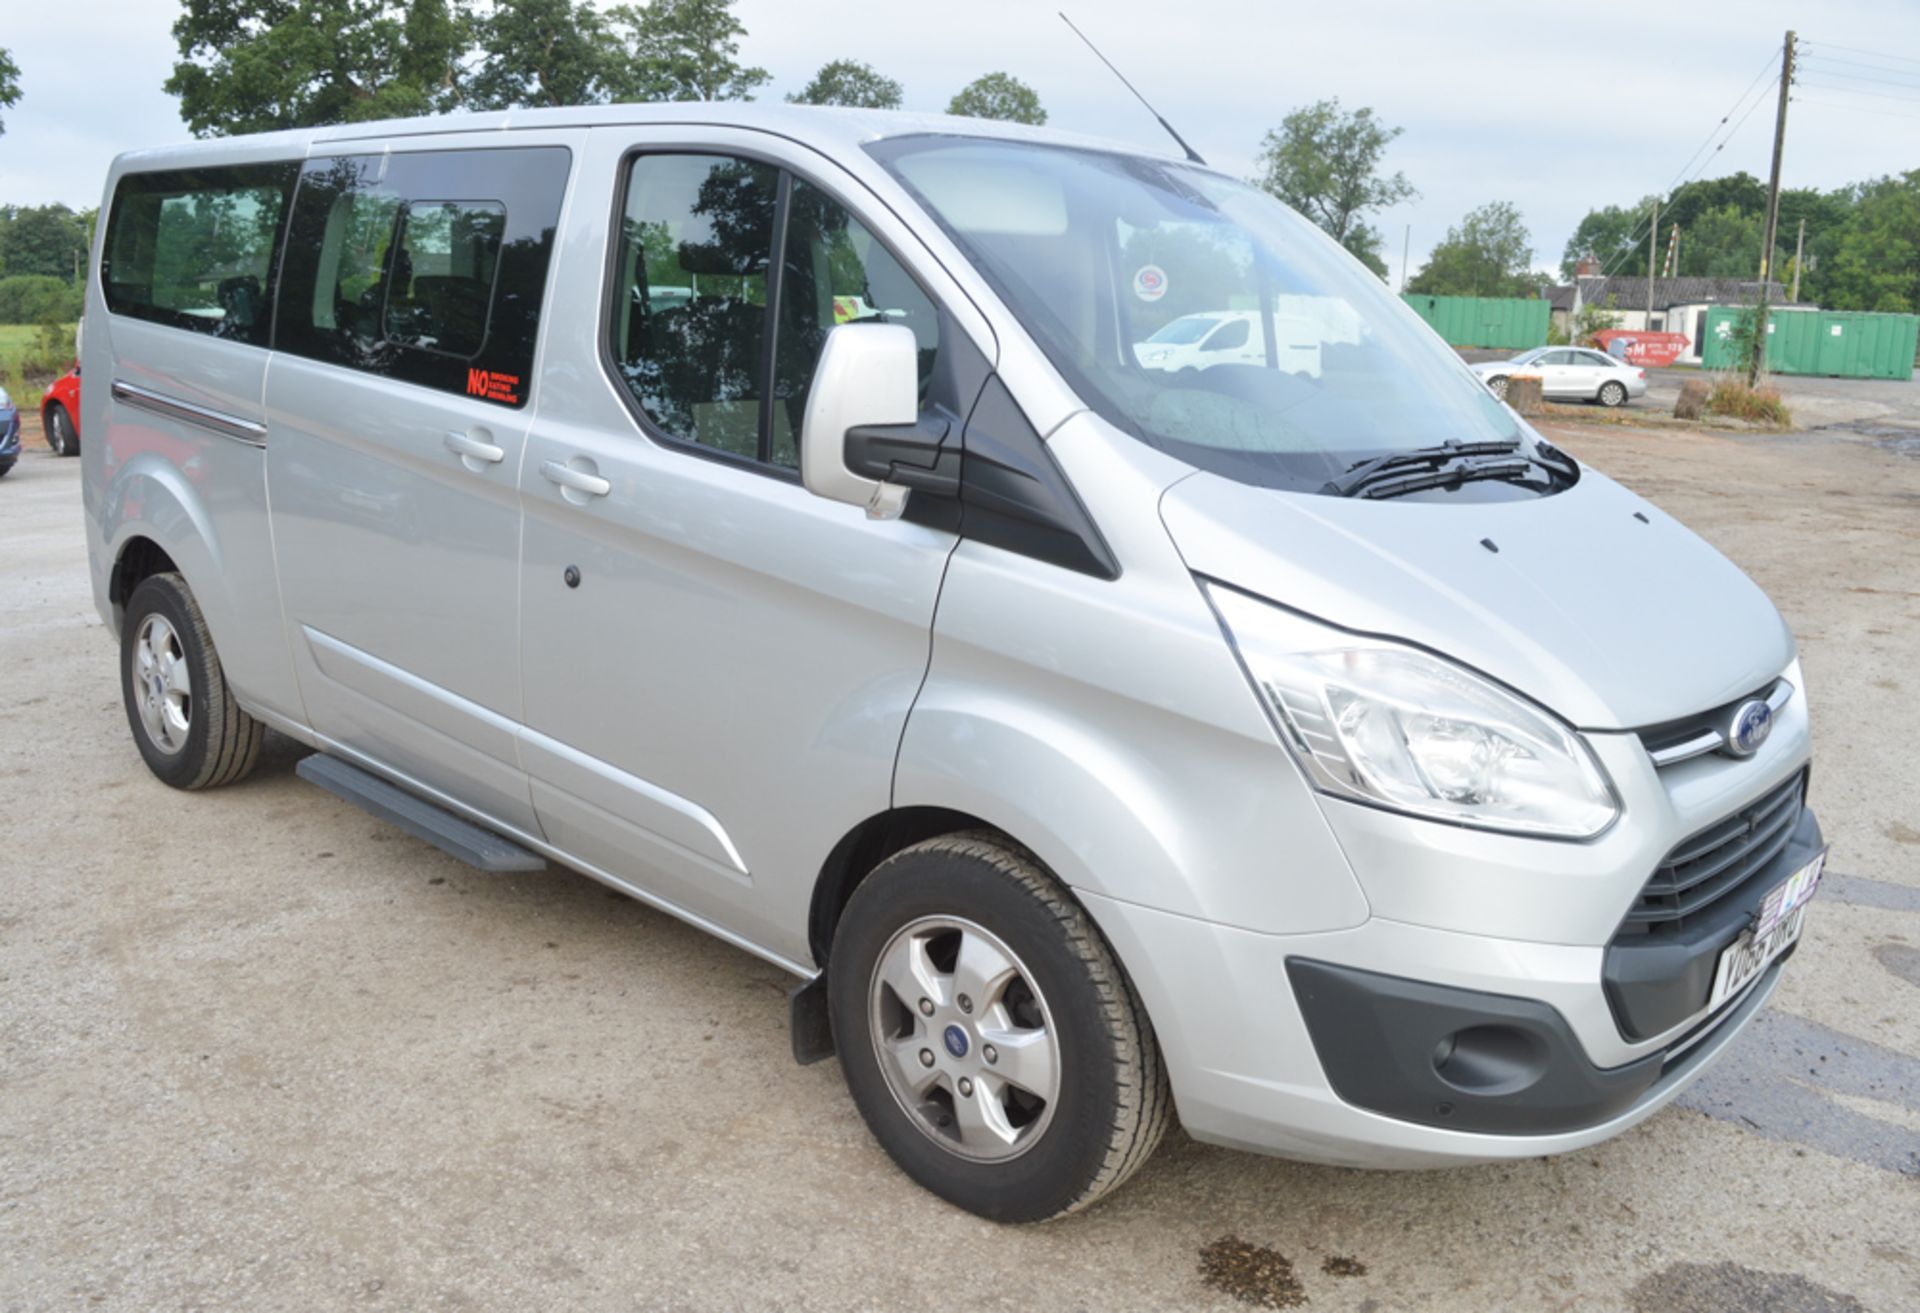 Ford Tourneo Custom 8 seat minibus  Registration Number: YD66 DRO  Date of Registration: 01/09/